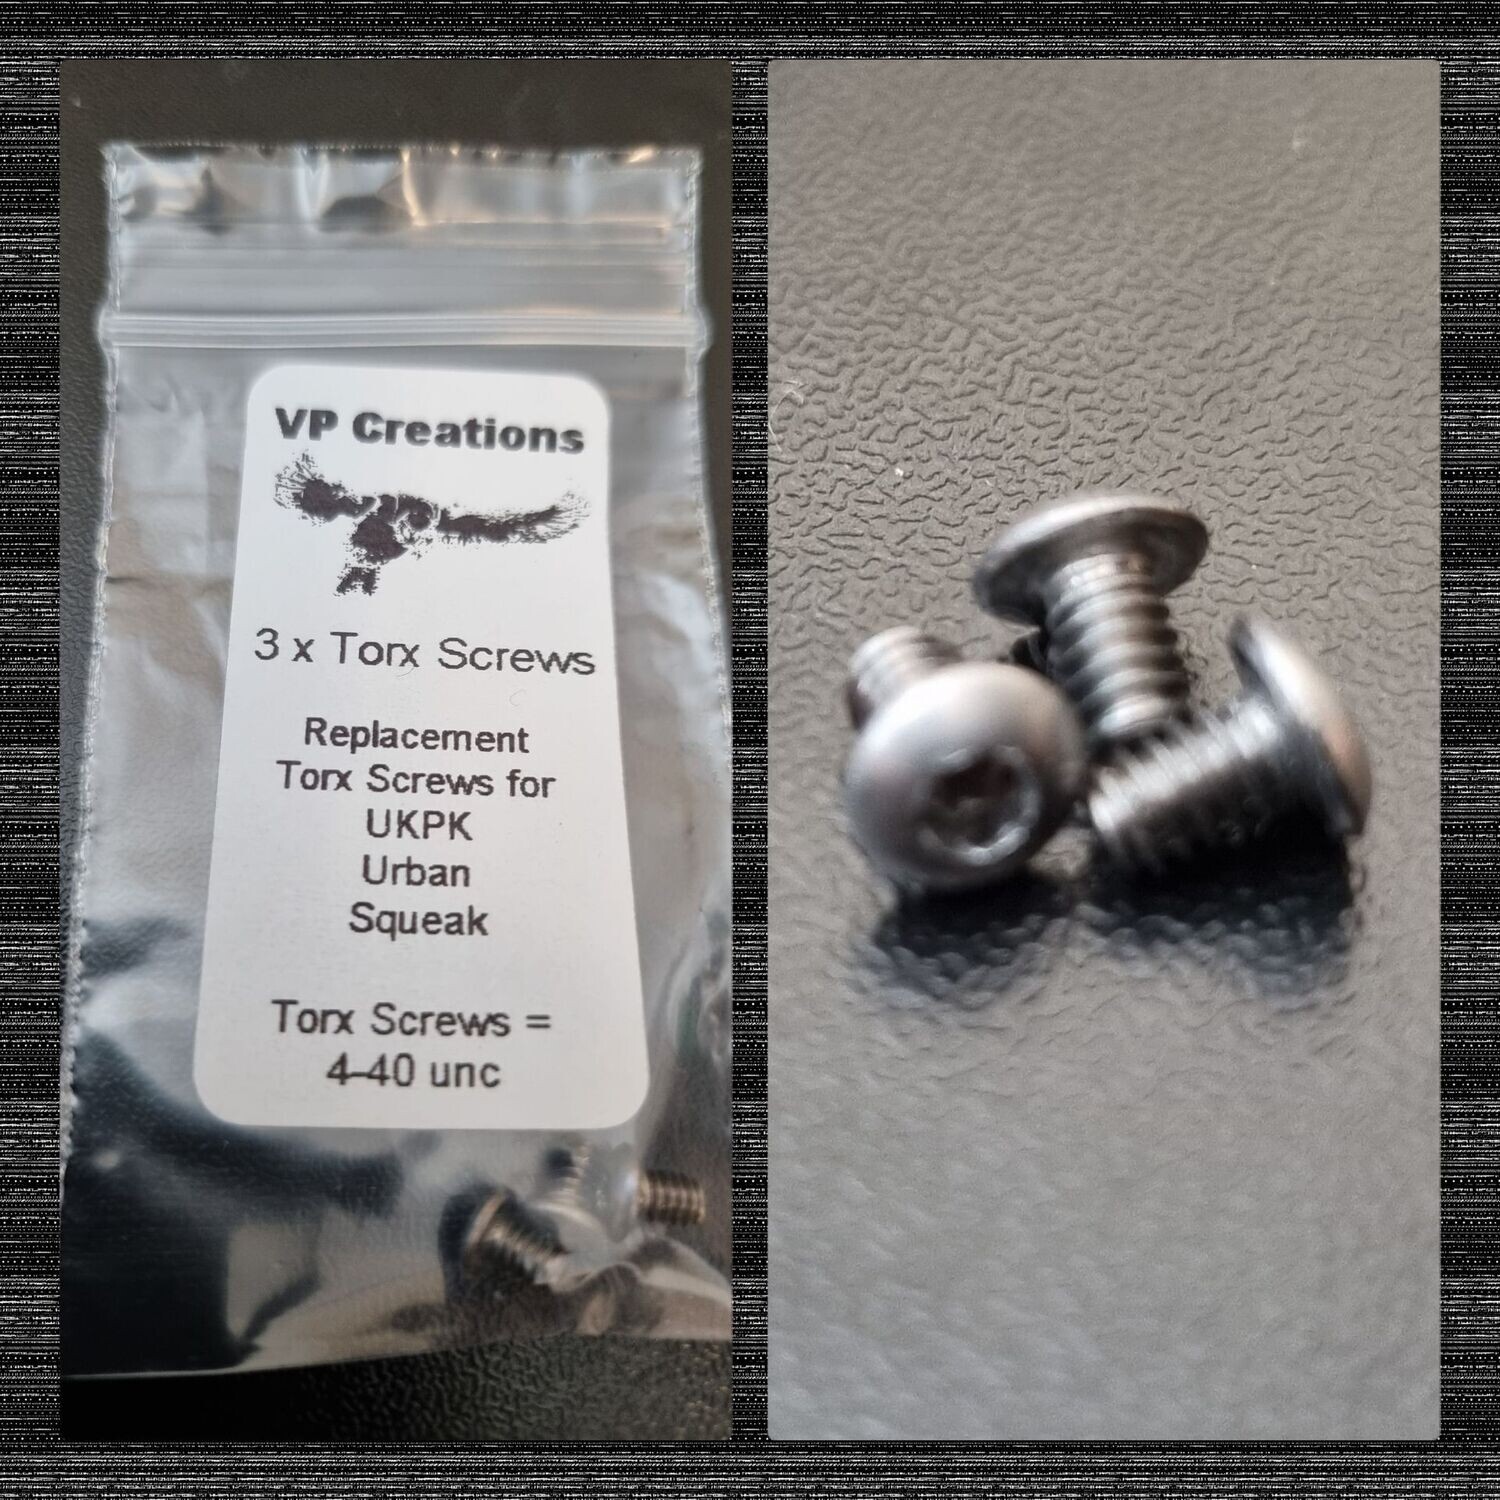 Replacement Torx Screws (Spyderco), D Pins and Torx Screws: 3x T8 Torx Screws (Plain)